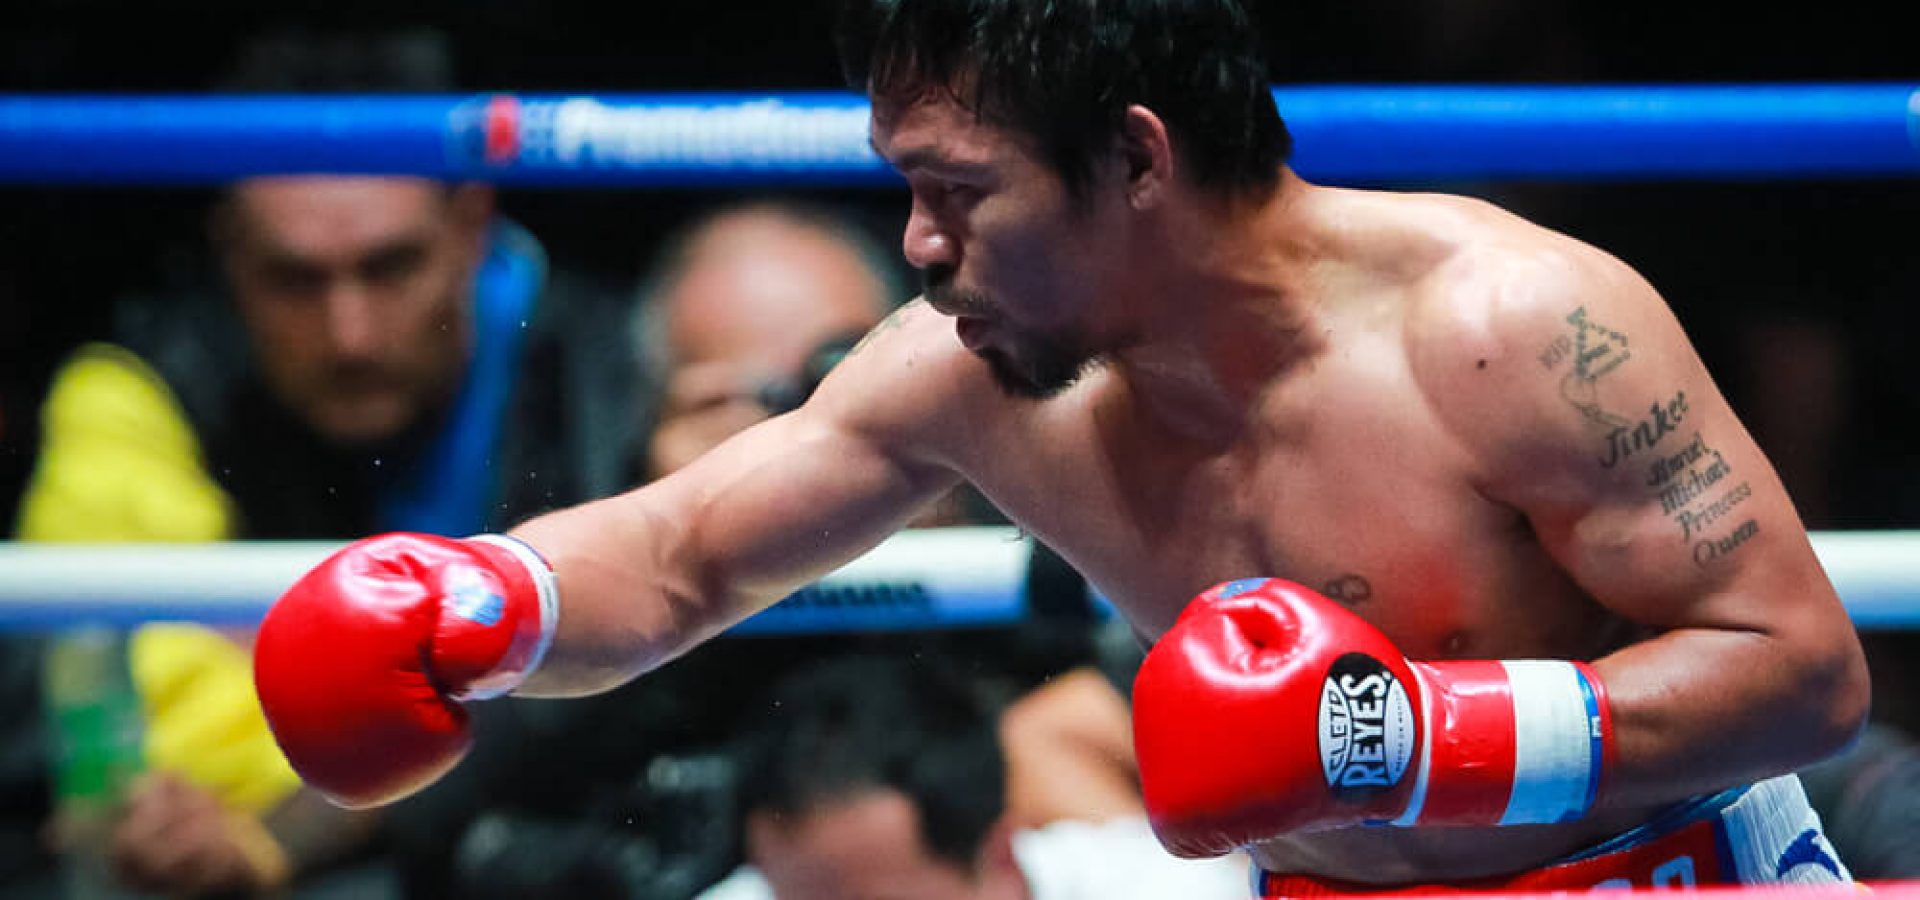 Professional Boxing: Manny Pacquiao during his fight.